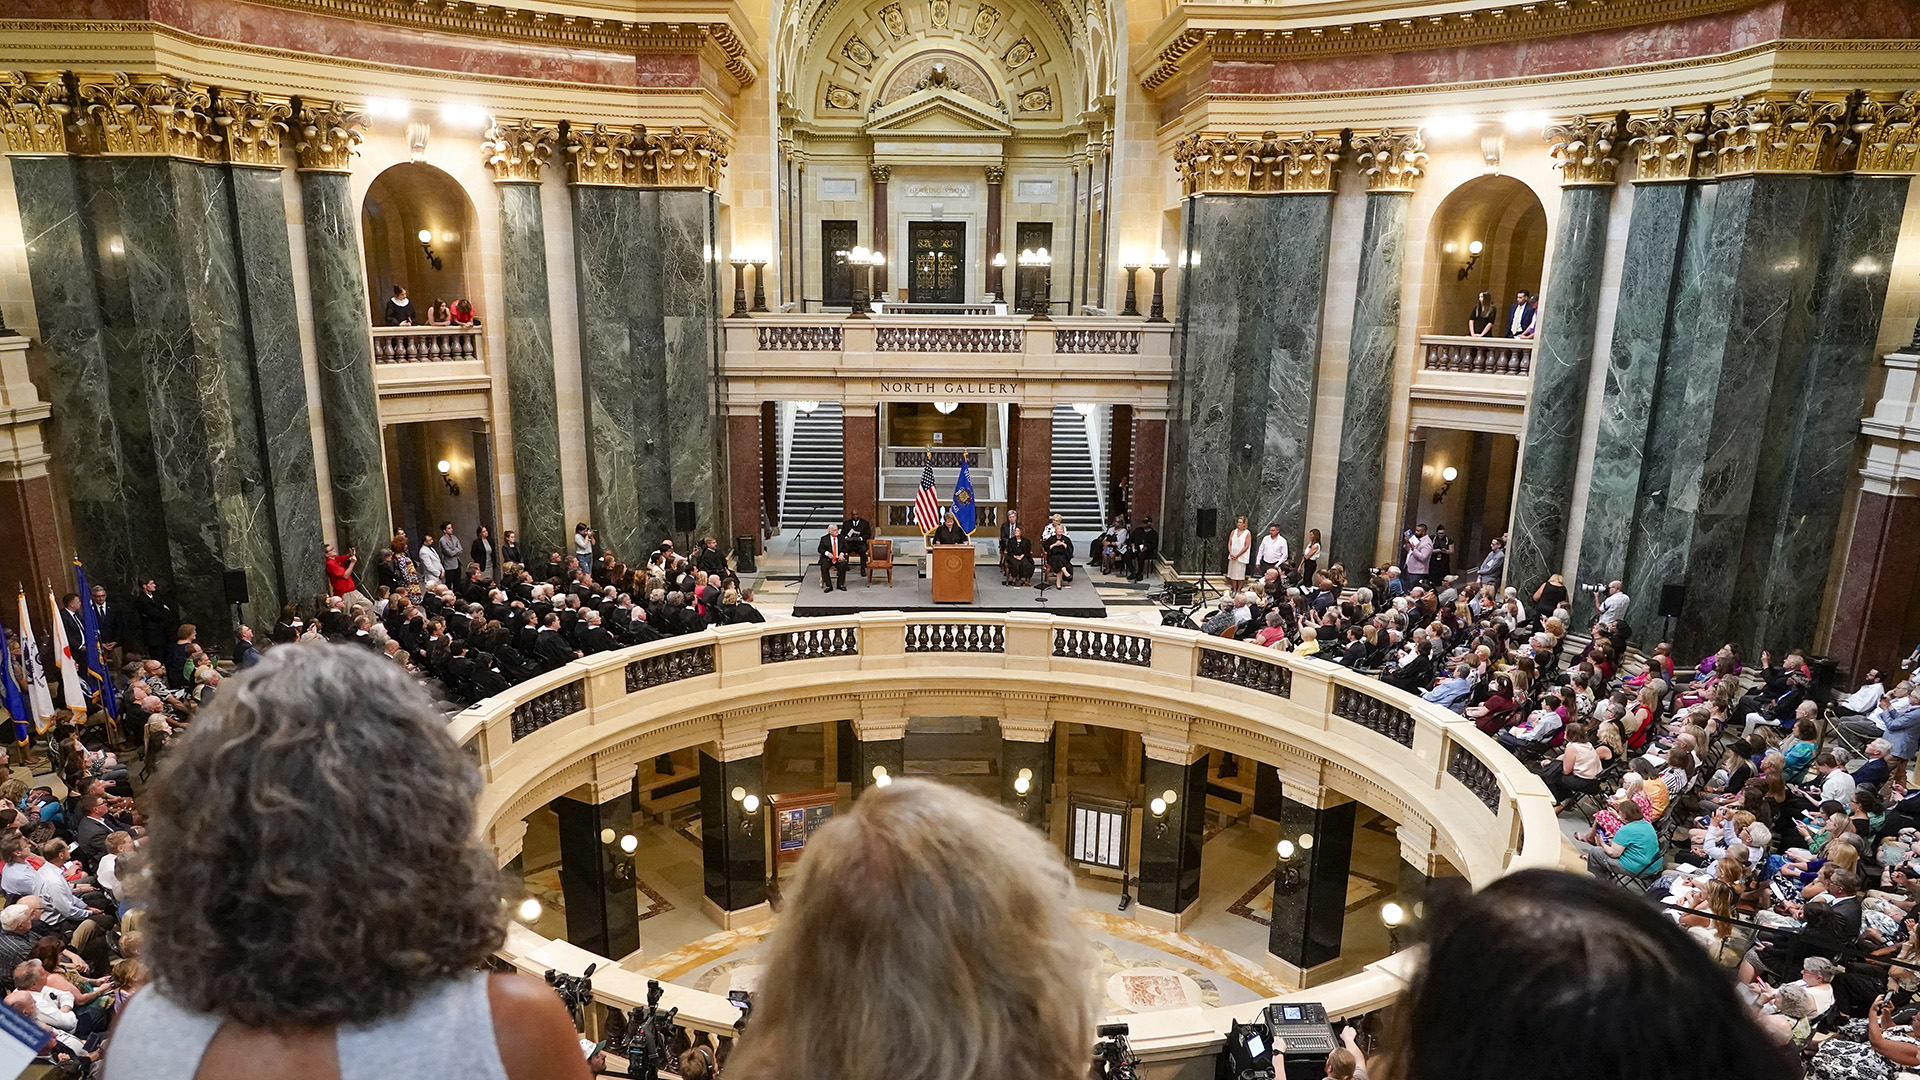 Numerous people sit and stand in the round on multiple levels of a rotunda with different colors of marble masonry, facing Janet Protasiewicz as she speaks while standing behind a wood podium and in front of the U.S. and Wisconsin flags